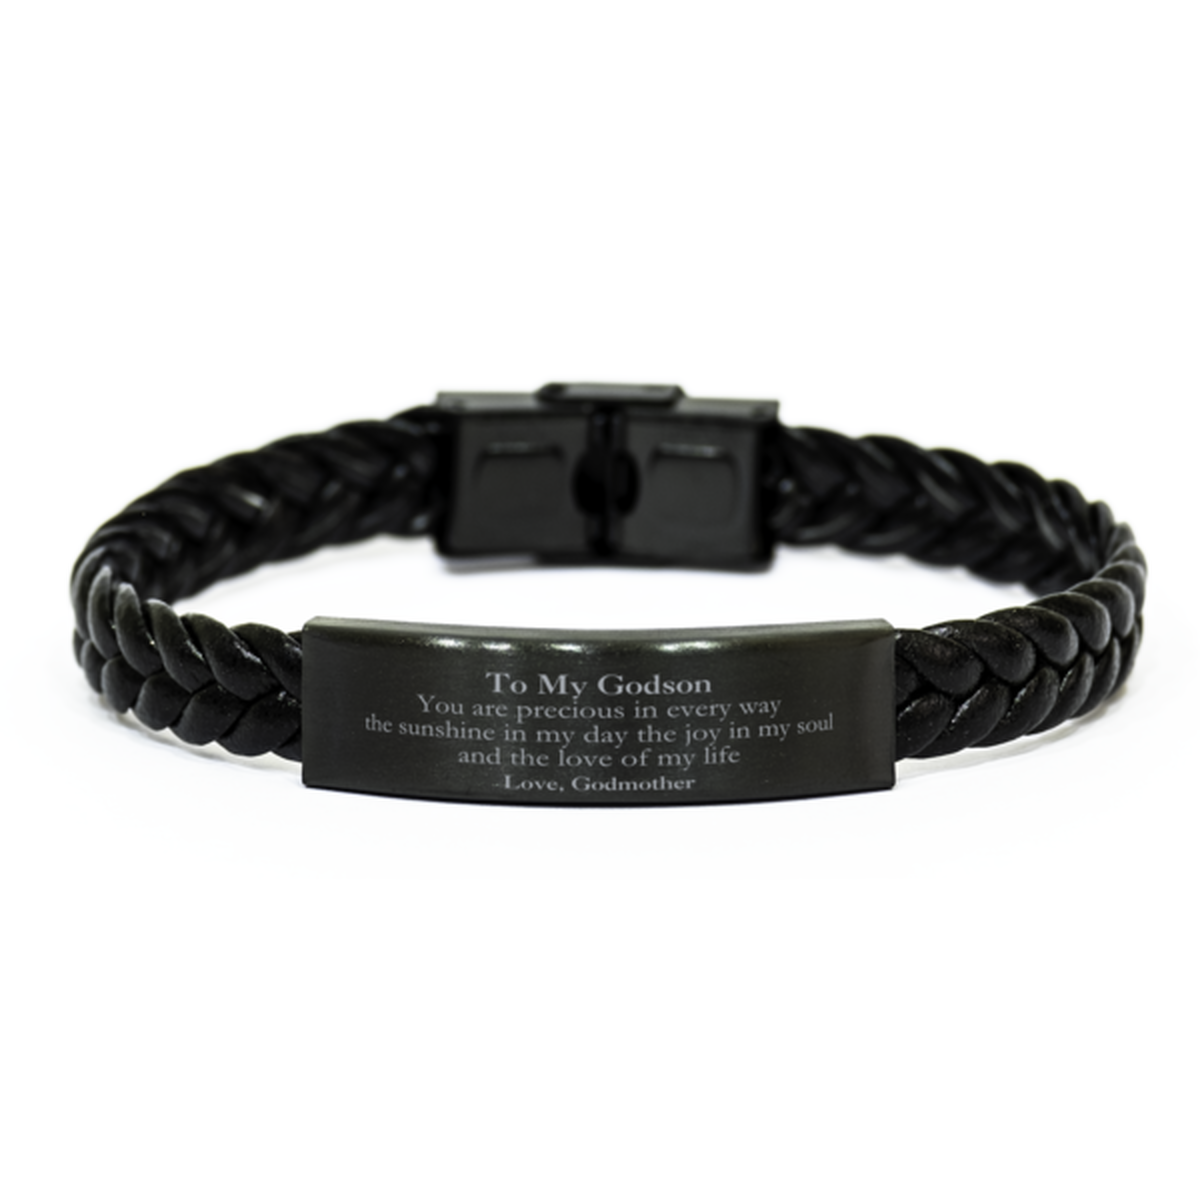 Graduation Gifts for Godson Braided Leather Bracelet Present from Godmother, Christmas Godson Birthday Gifts Godson You are precious in every way the sunshine in my day. Love, Godmother